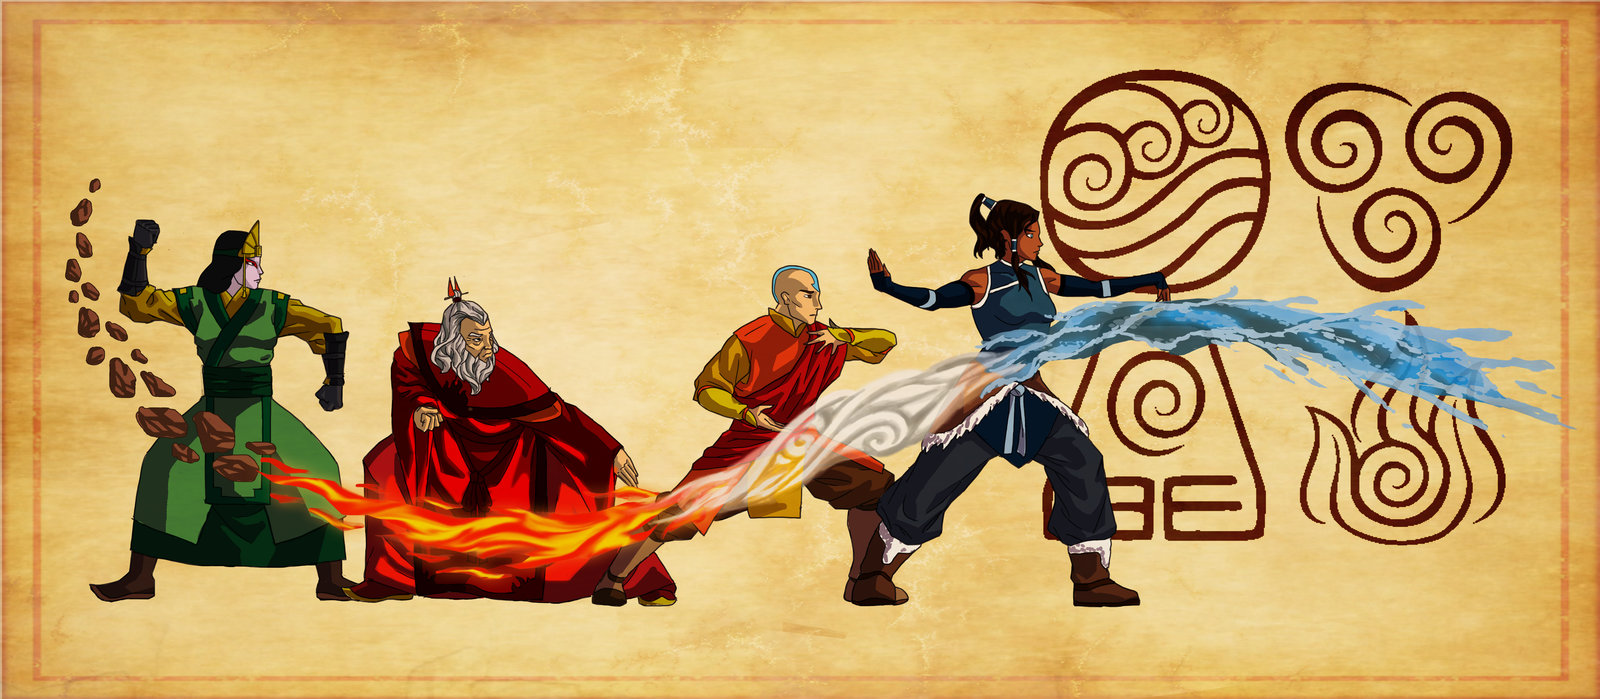 the avatar cycle